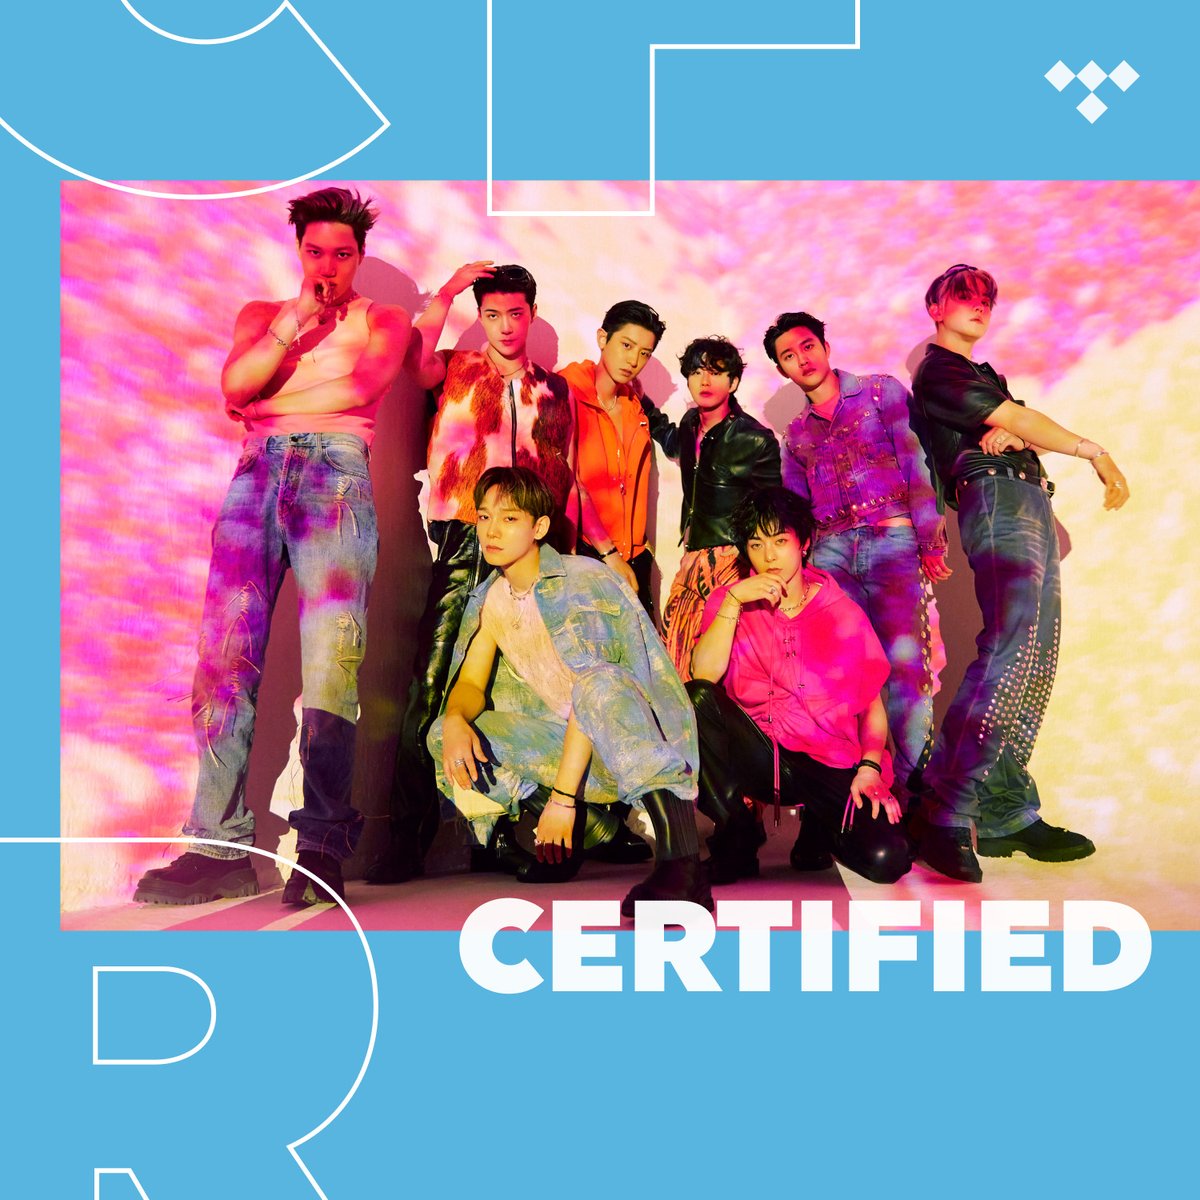 EXO is on the cover of @TIDAL's Certified: New & Hot in K-Pop playlist! Check it out and enjoy our new song 'Cream Soda'! 🤍 🥤bit.ly/3NVqGQr 🎧bit.ly/3Dk5Aq9 #EXO #엑소 #weareoneEXO #EXIST #EXO_EXIST #CreamSoda #EXO_CreamSoda